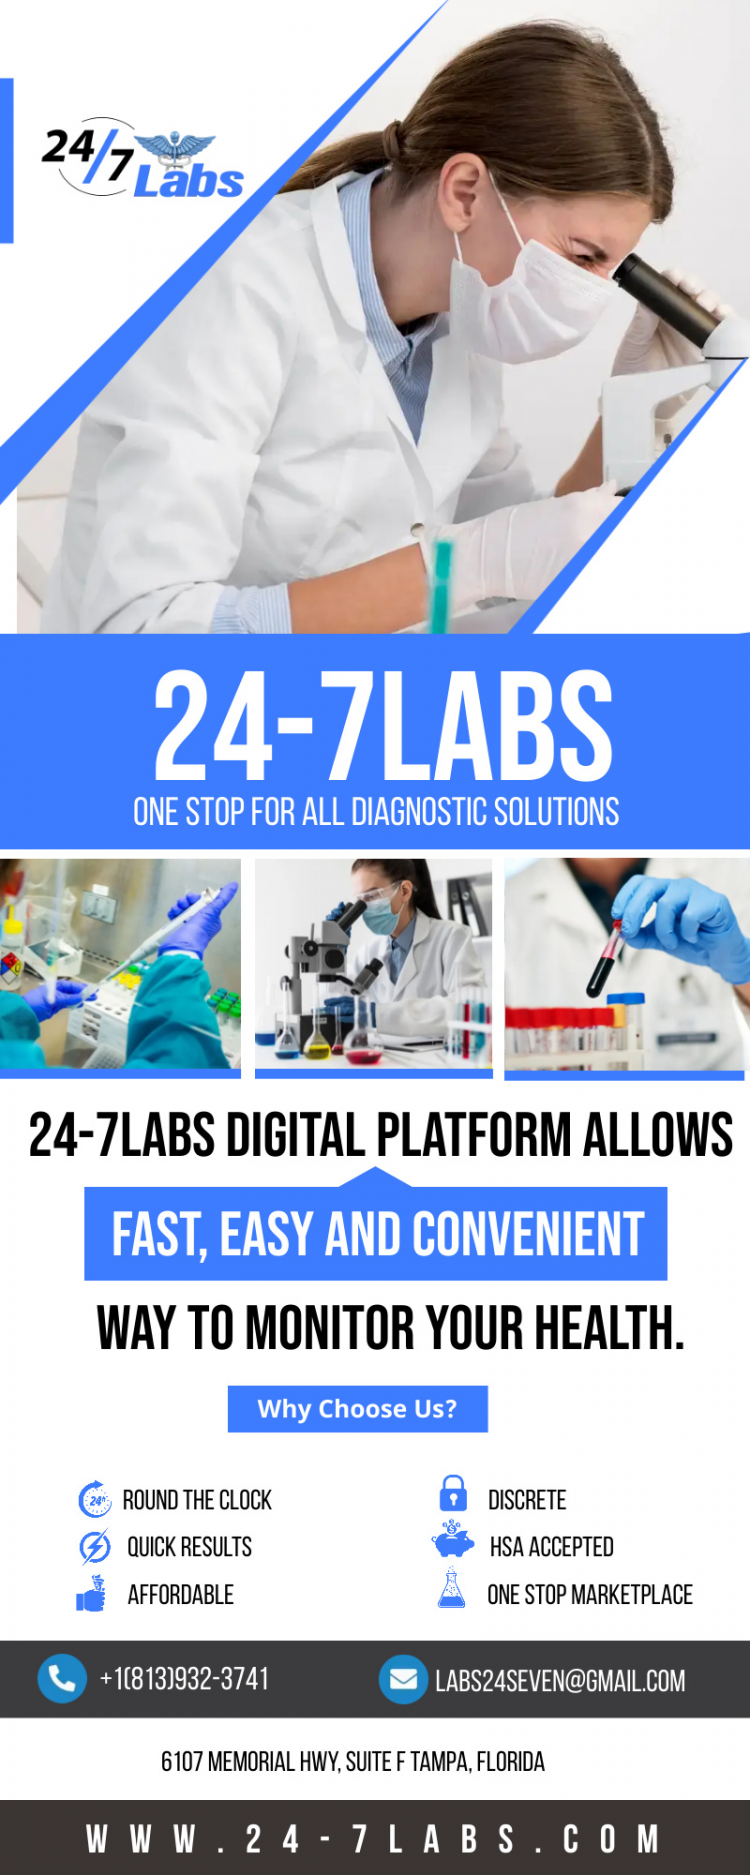 24-7 Labs offers a full range of professional and diagnostic testing services for every age group. We test for dozens of diseases and disorders, helping you to protect your health and well-being. Our mission is to give people the power to control their health by providing convenient, affordable, and easy to understand options.  https://www.24-7labs.com/